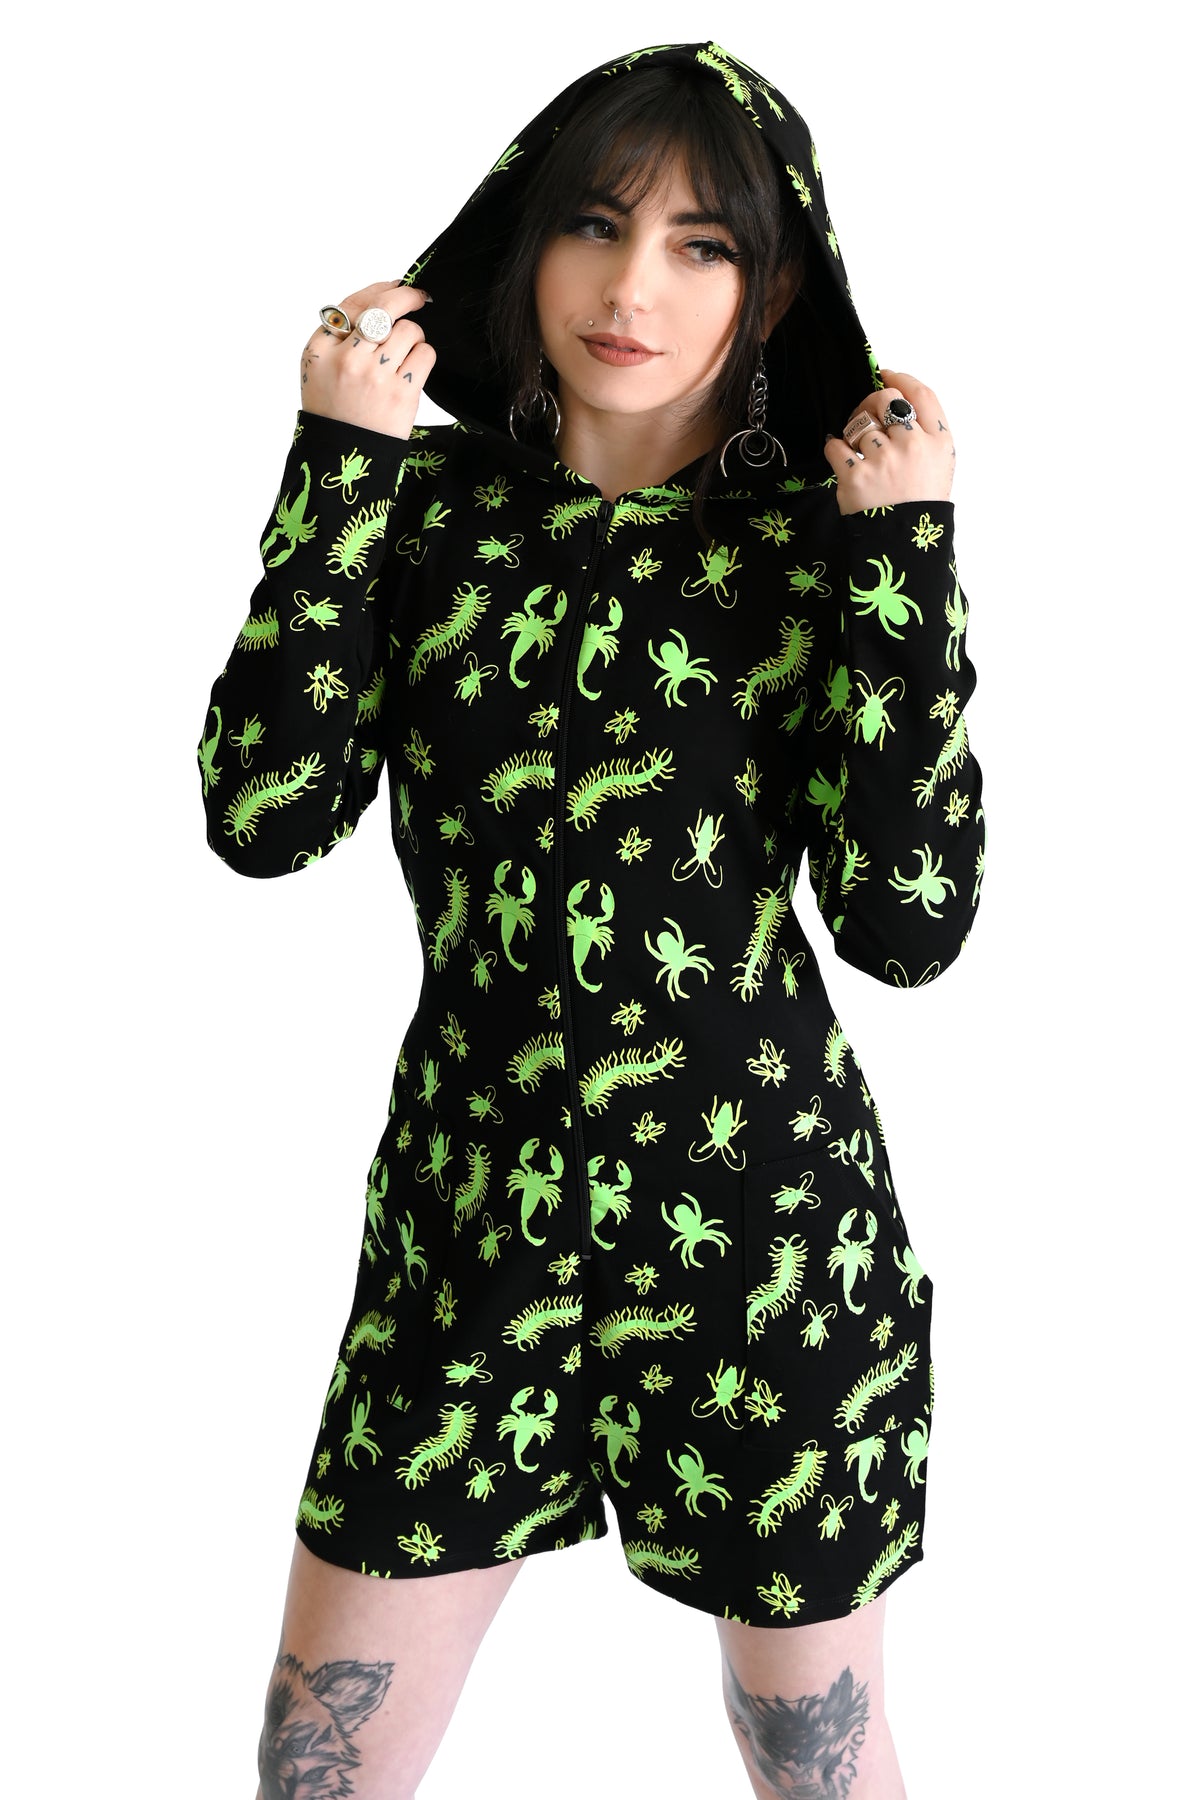 black long sleeve roper with green glow in the dark bugs print, zip up front and a hood